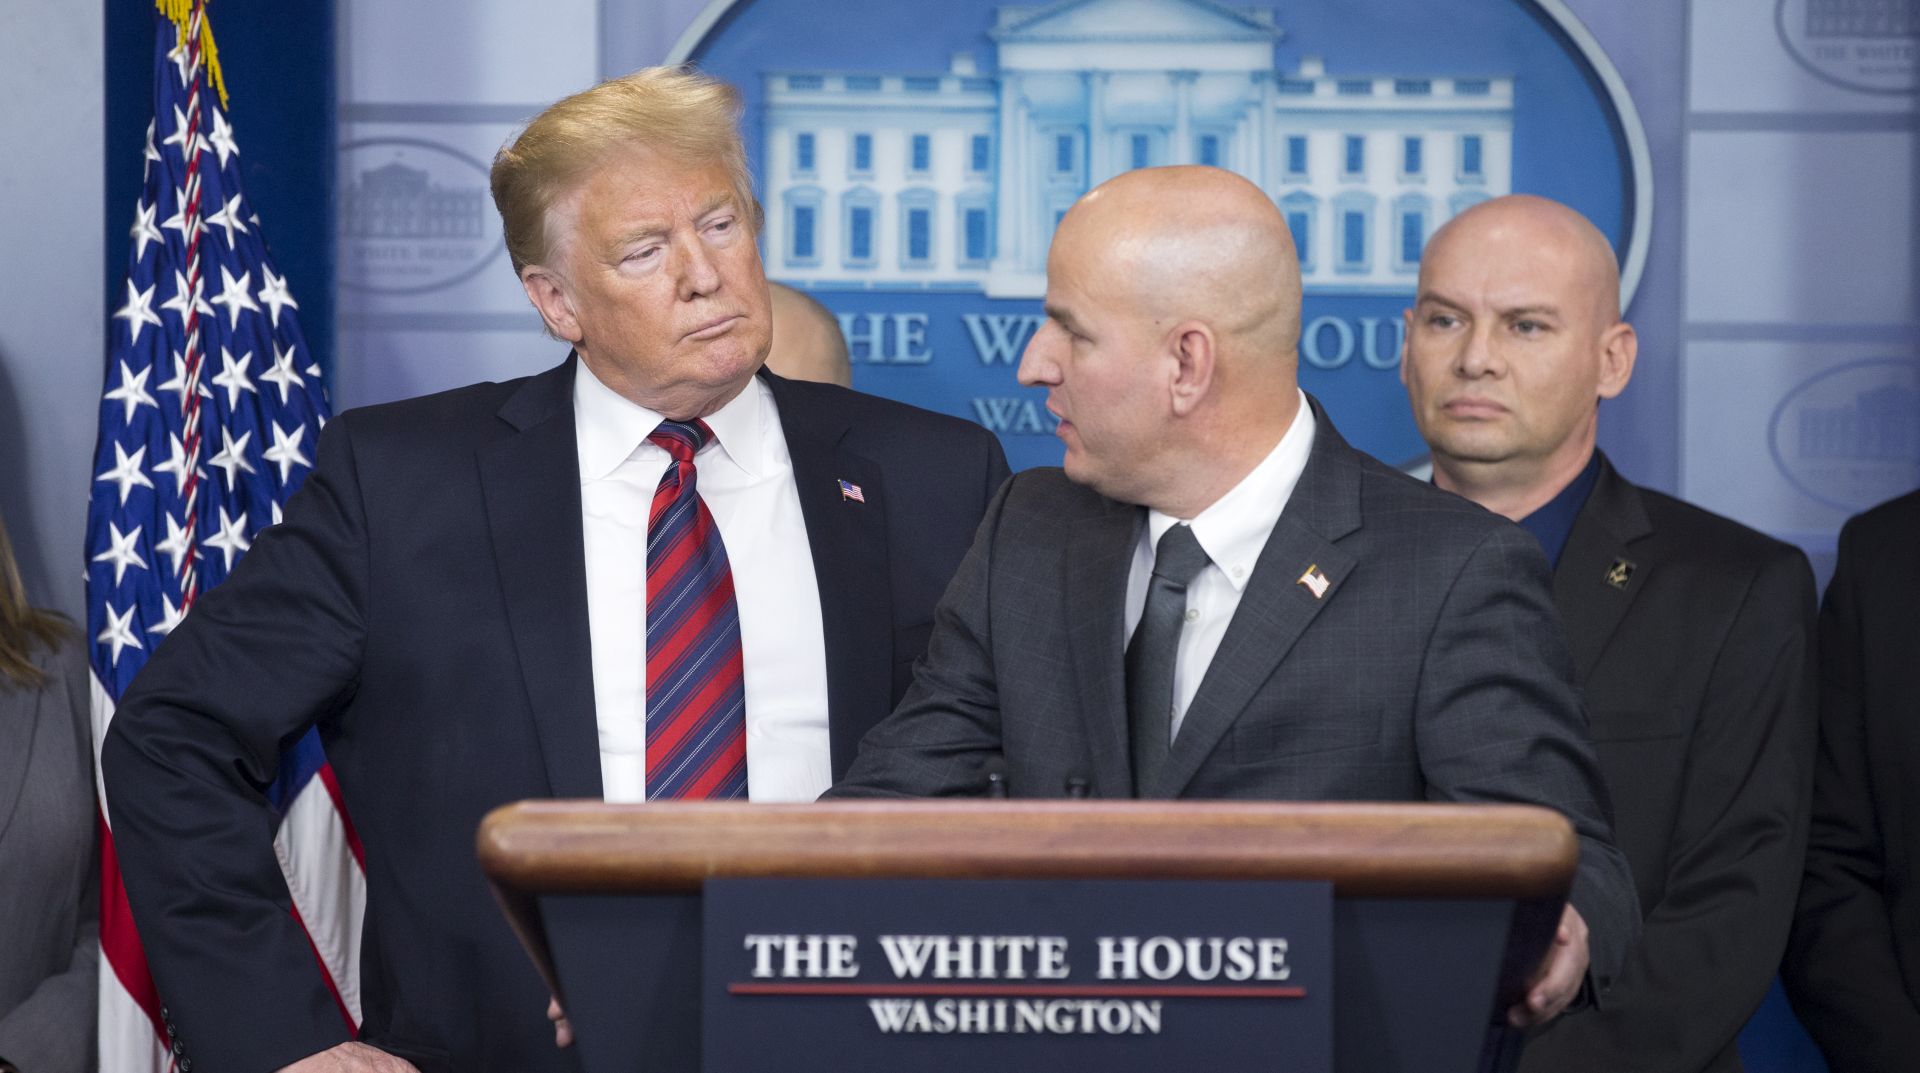 epa07260652 US President Donald J. Trump (L) listens to National Border Patrol Council (NBPC) President Brandon Judd (C) deliver a statement on border security with members of the NBPC, in the James Brady Press Briefing Room of the White House in Washington, DC, USA, 03 January 2019. A partial shutdown of the government began when Congress and Trump failed to strike a deal before a 22 December 2018 deadine, due to differences regarding border security.  EPA/MICHAEL REYNOLDS